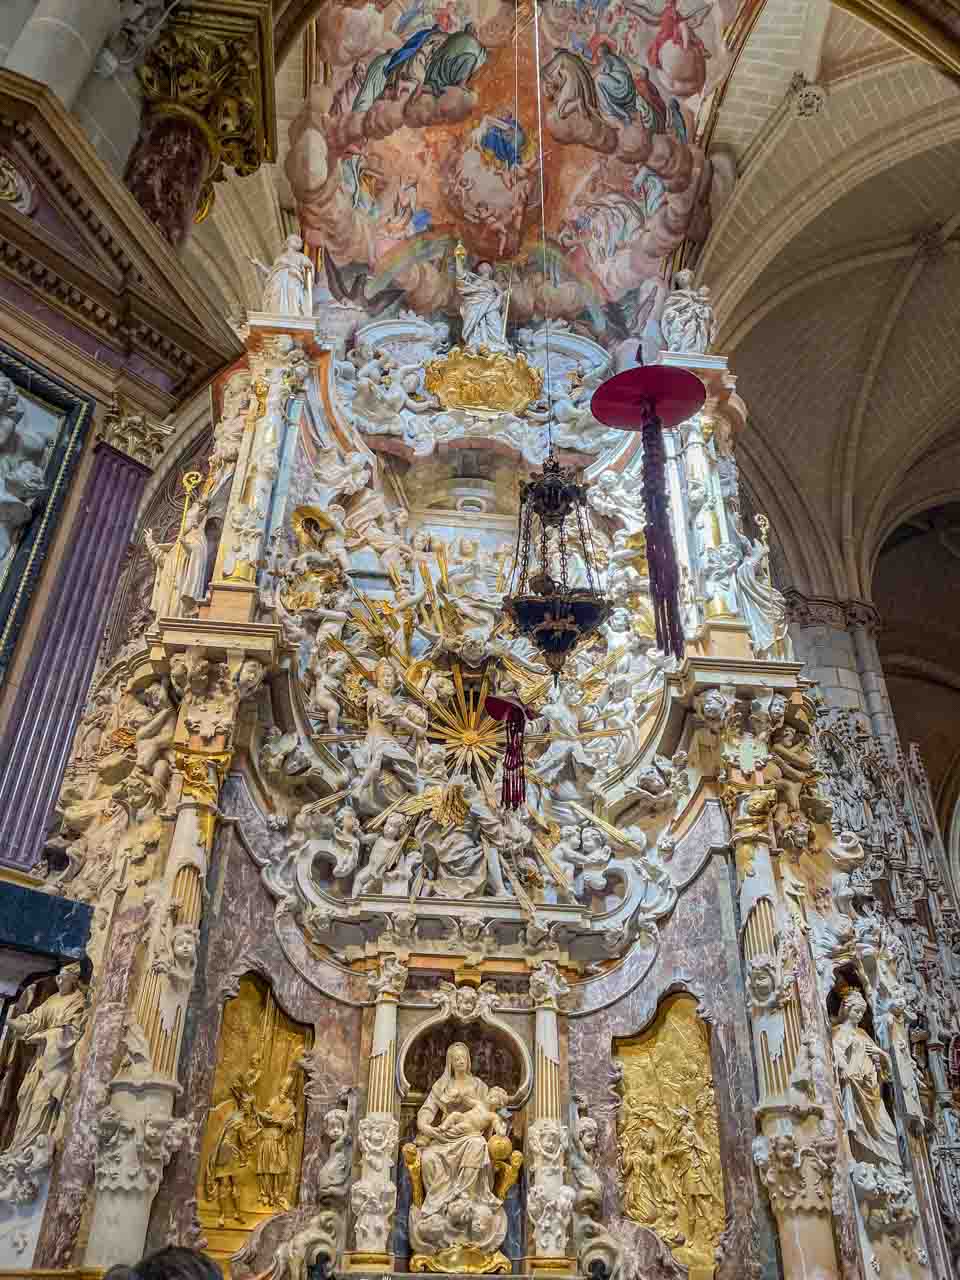 A cathedral's altar with many religious figures.